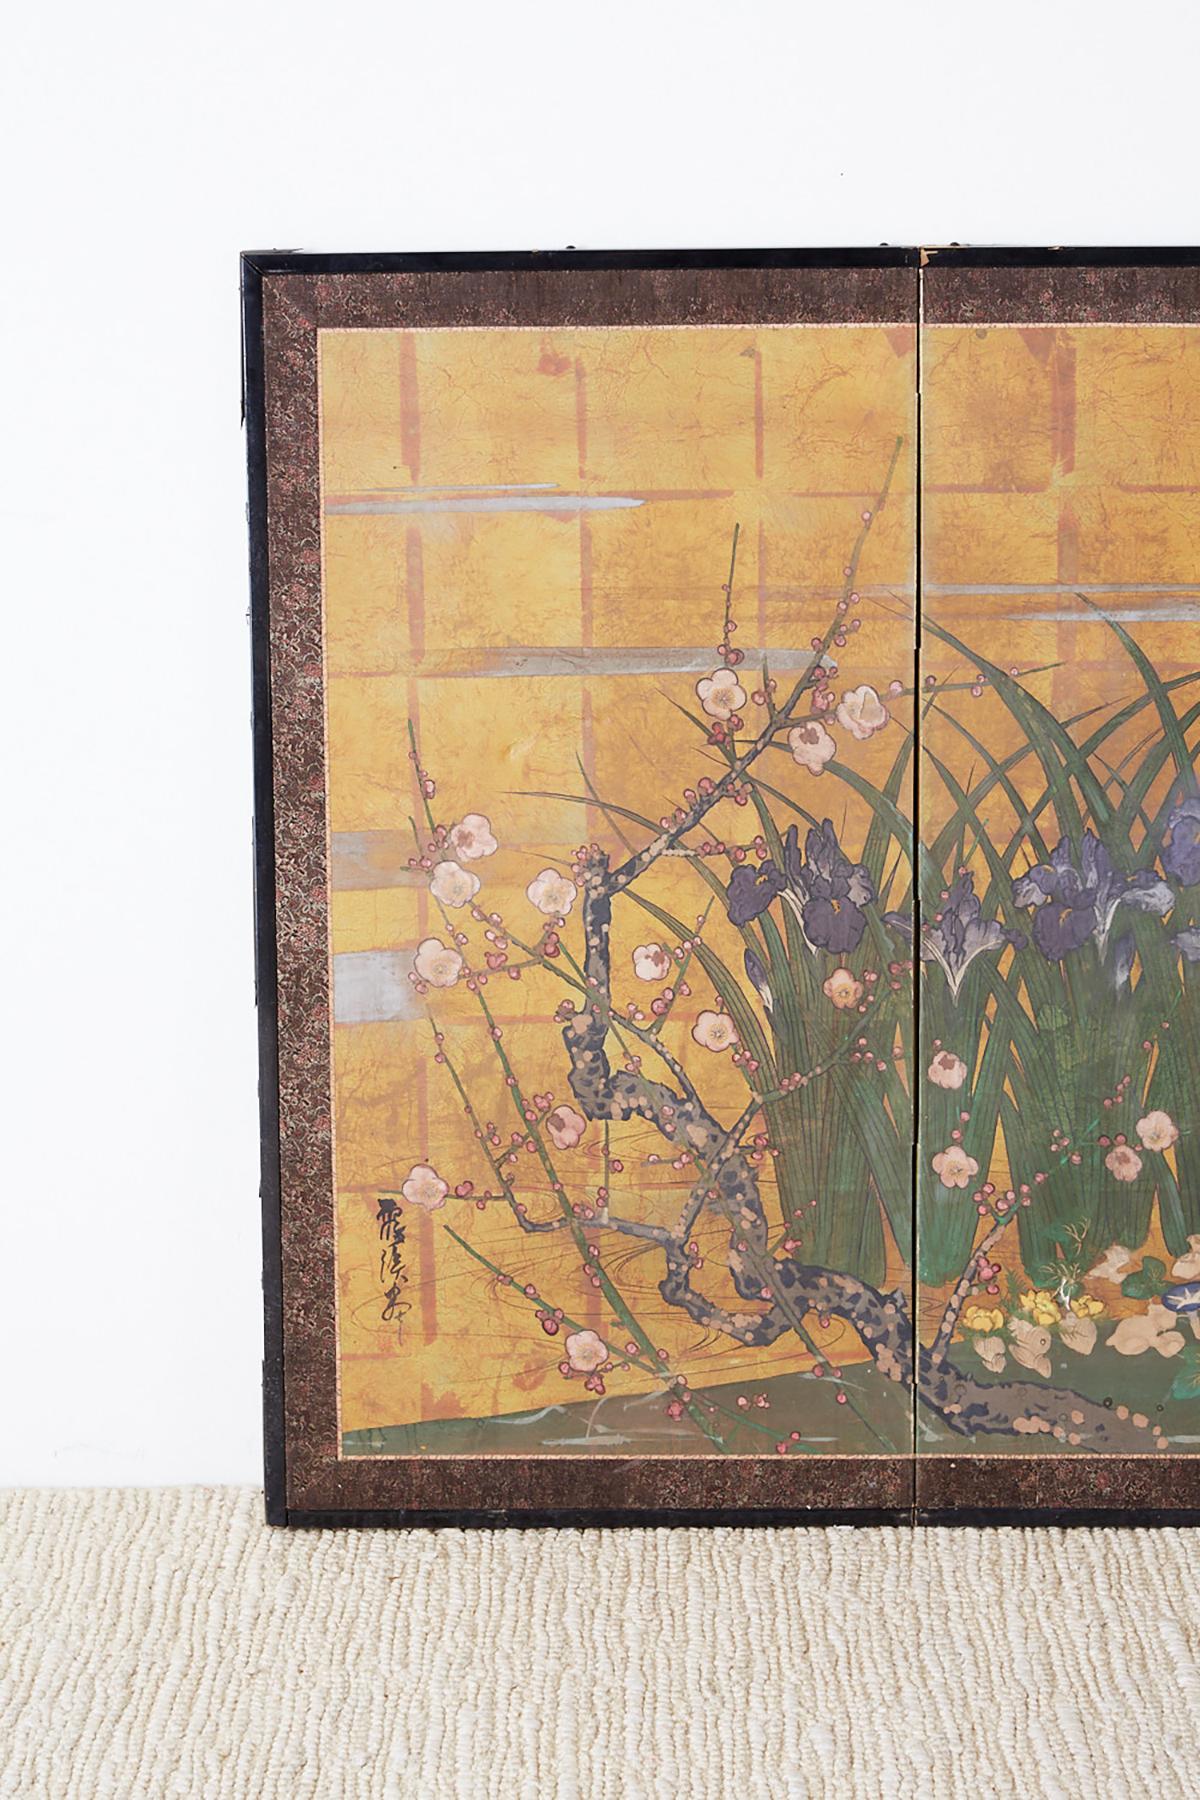 Captivating Japanese Showa four-panel byobu screen depicting a floral and foliate scene. Interesting style in which the artist has created a painting with an aged and distressed patina. Having a faux-gilt square painted background and flowers with a